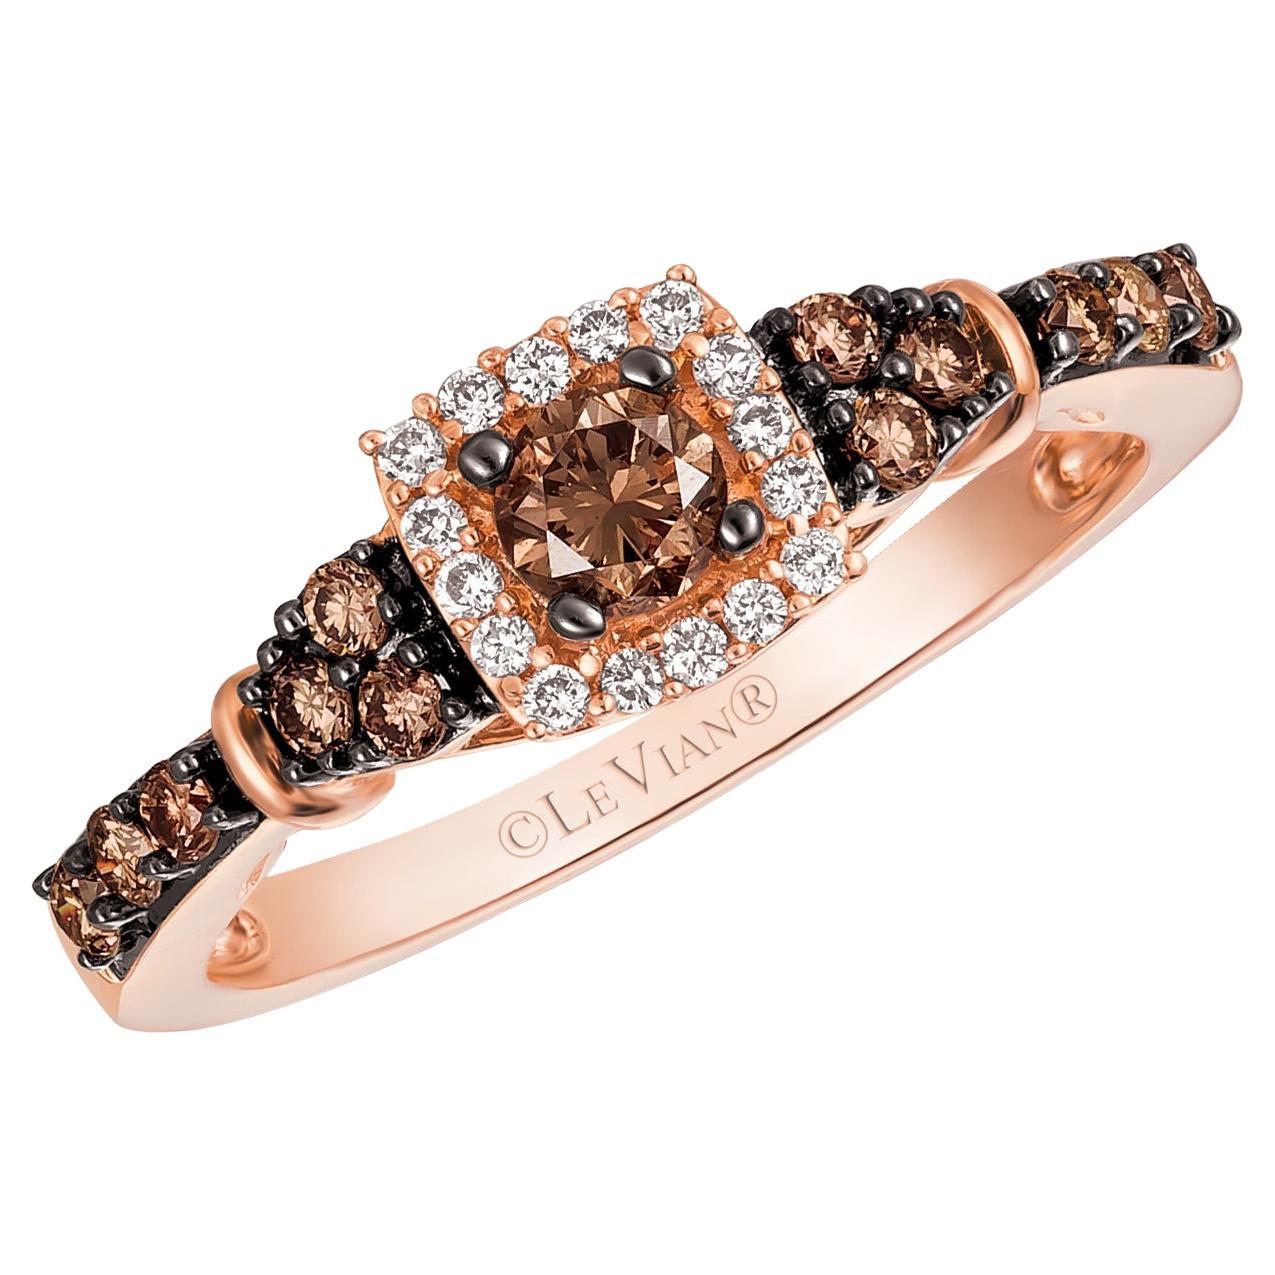 Discover 111+ levian rings on sale